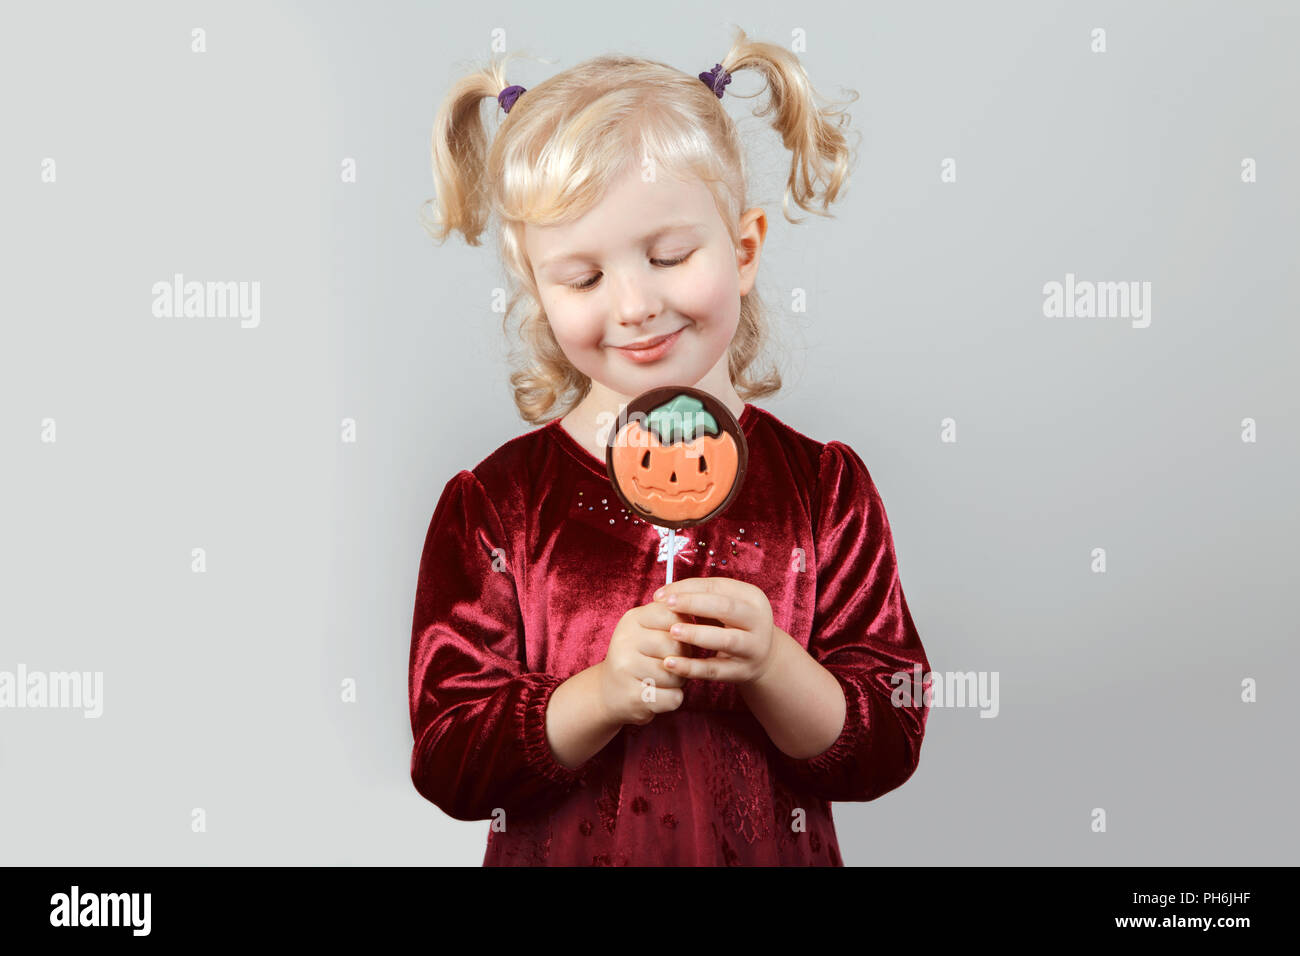 Portrait of adorable funny white blonde Caucasian girl with pigtails dressed for Halloween. Child playing having fun in studio for autumn fall seasona Stock Photo